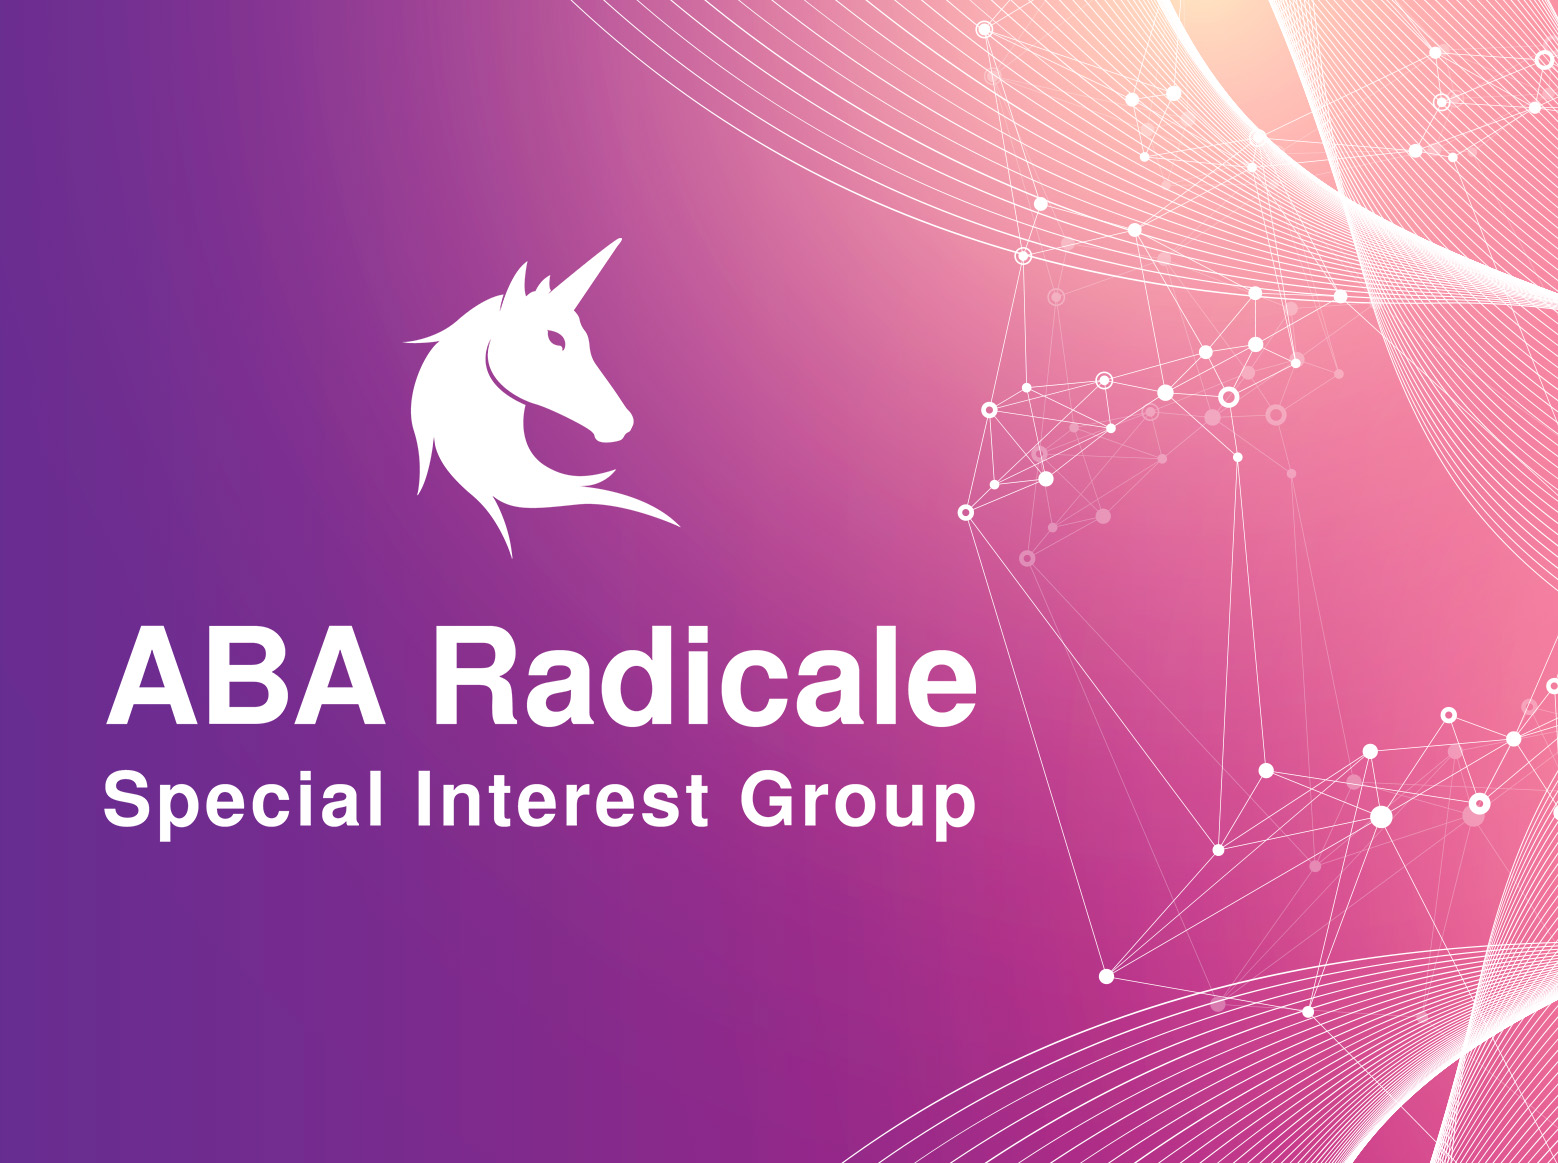 ABA Radicale Special Interest Group (SIG)